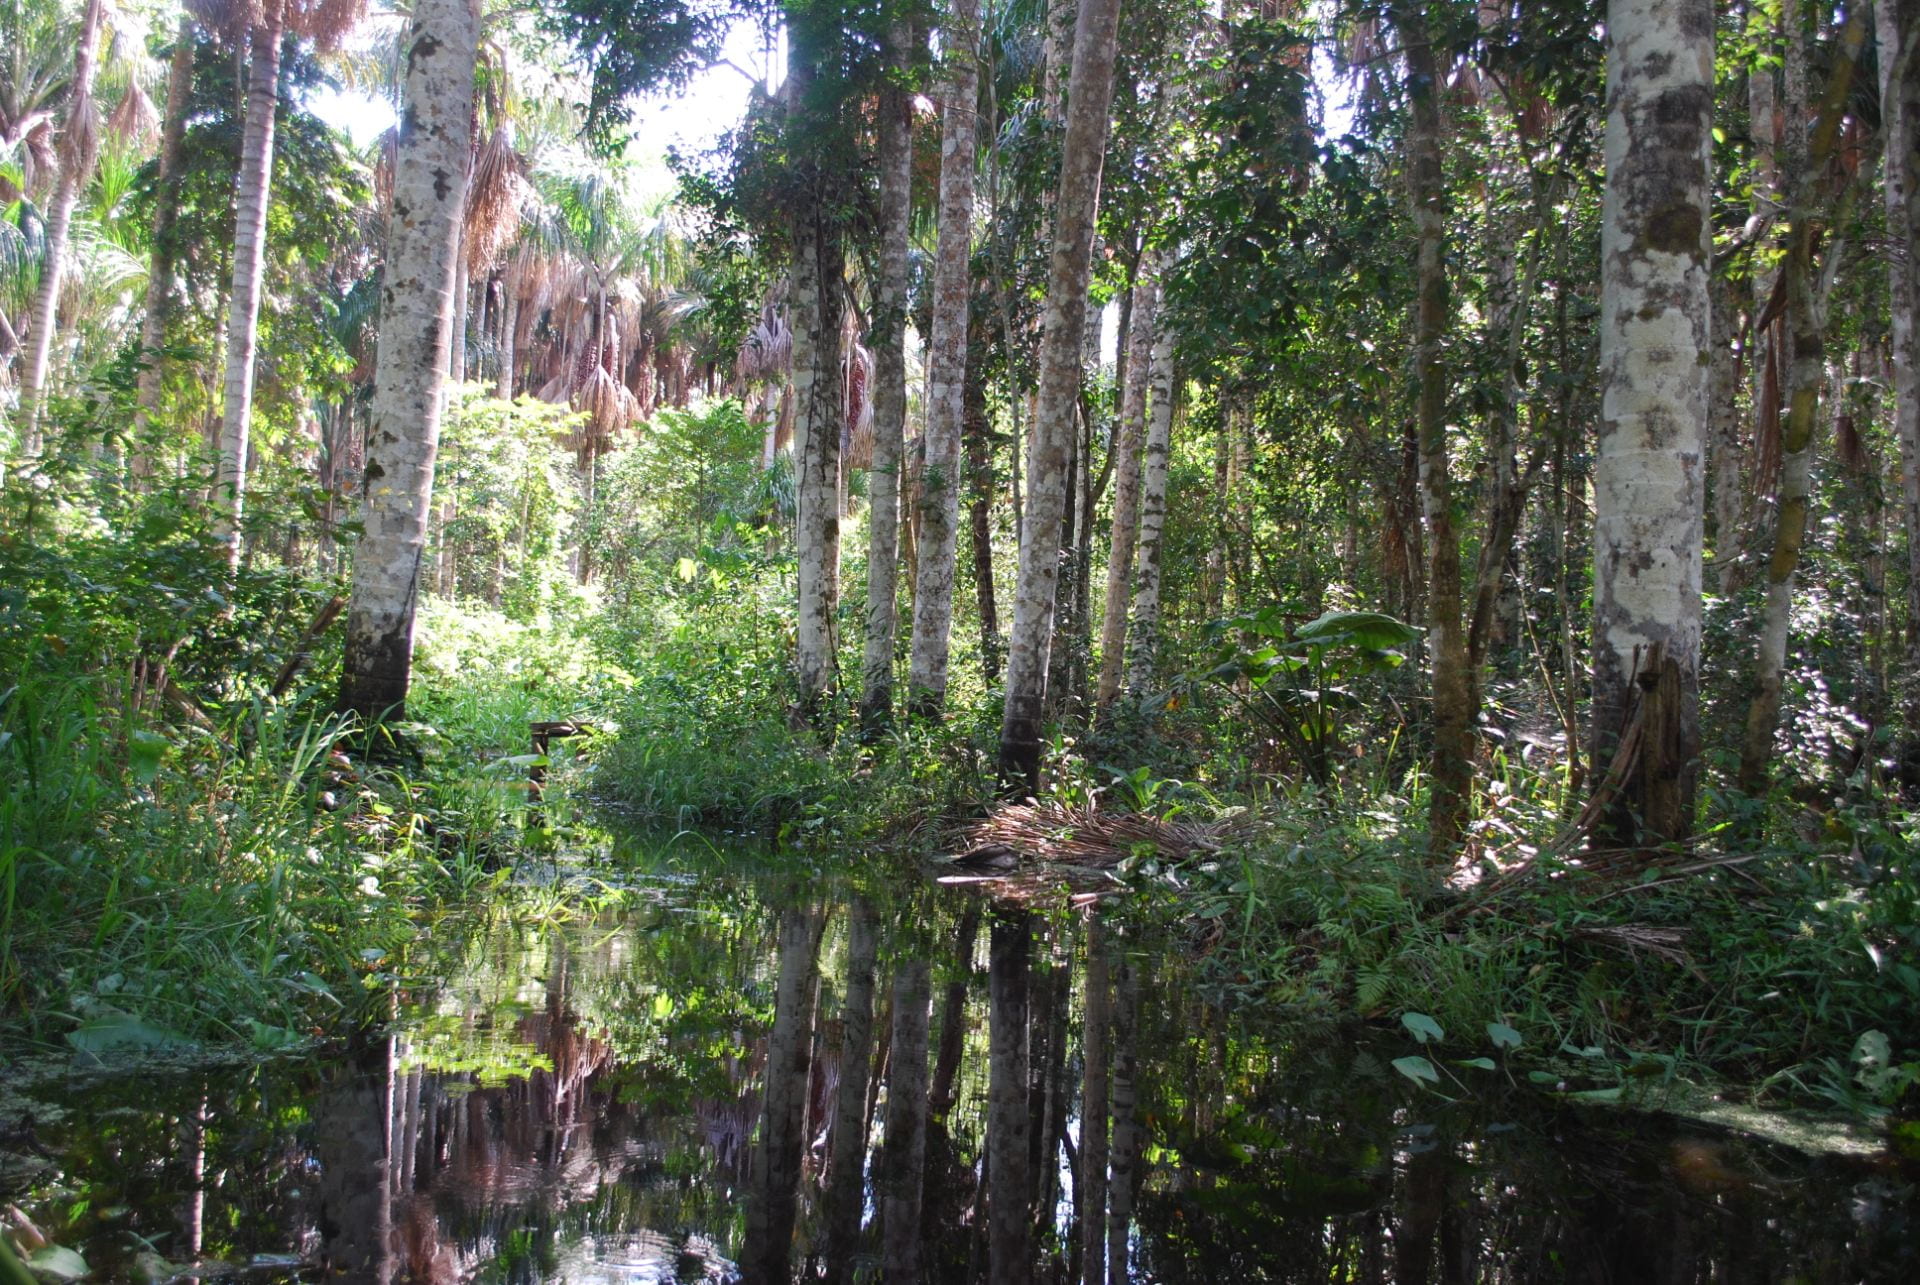 Trees in a swamp in the Amazon rain forest.